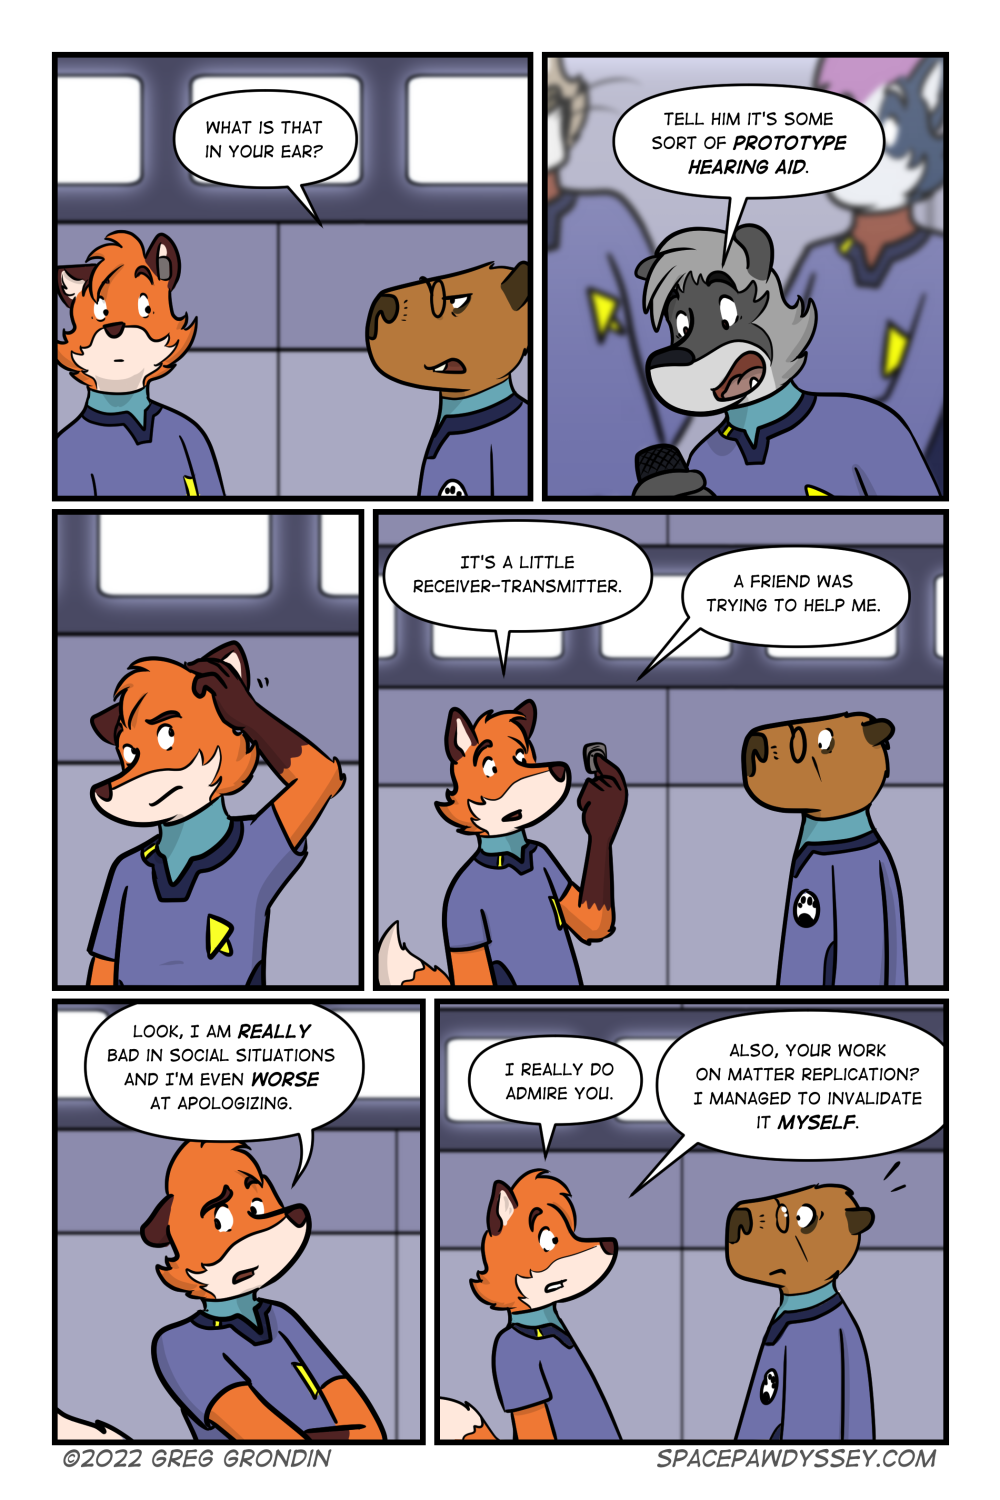 Space Pawdyssey #550